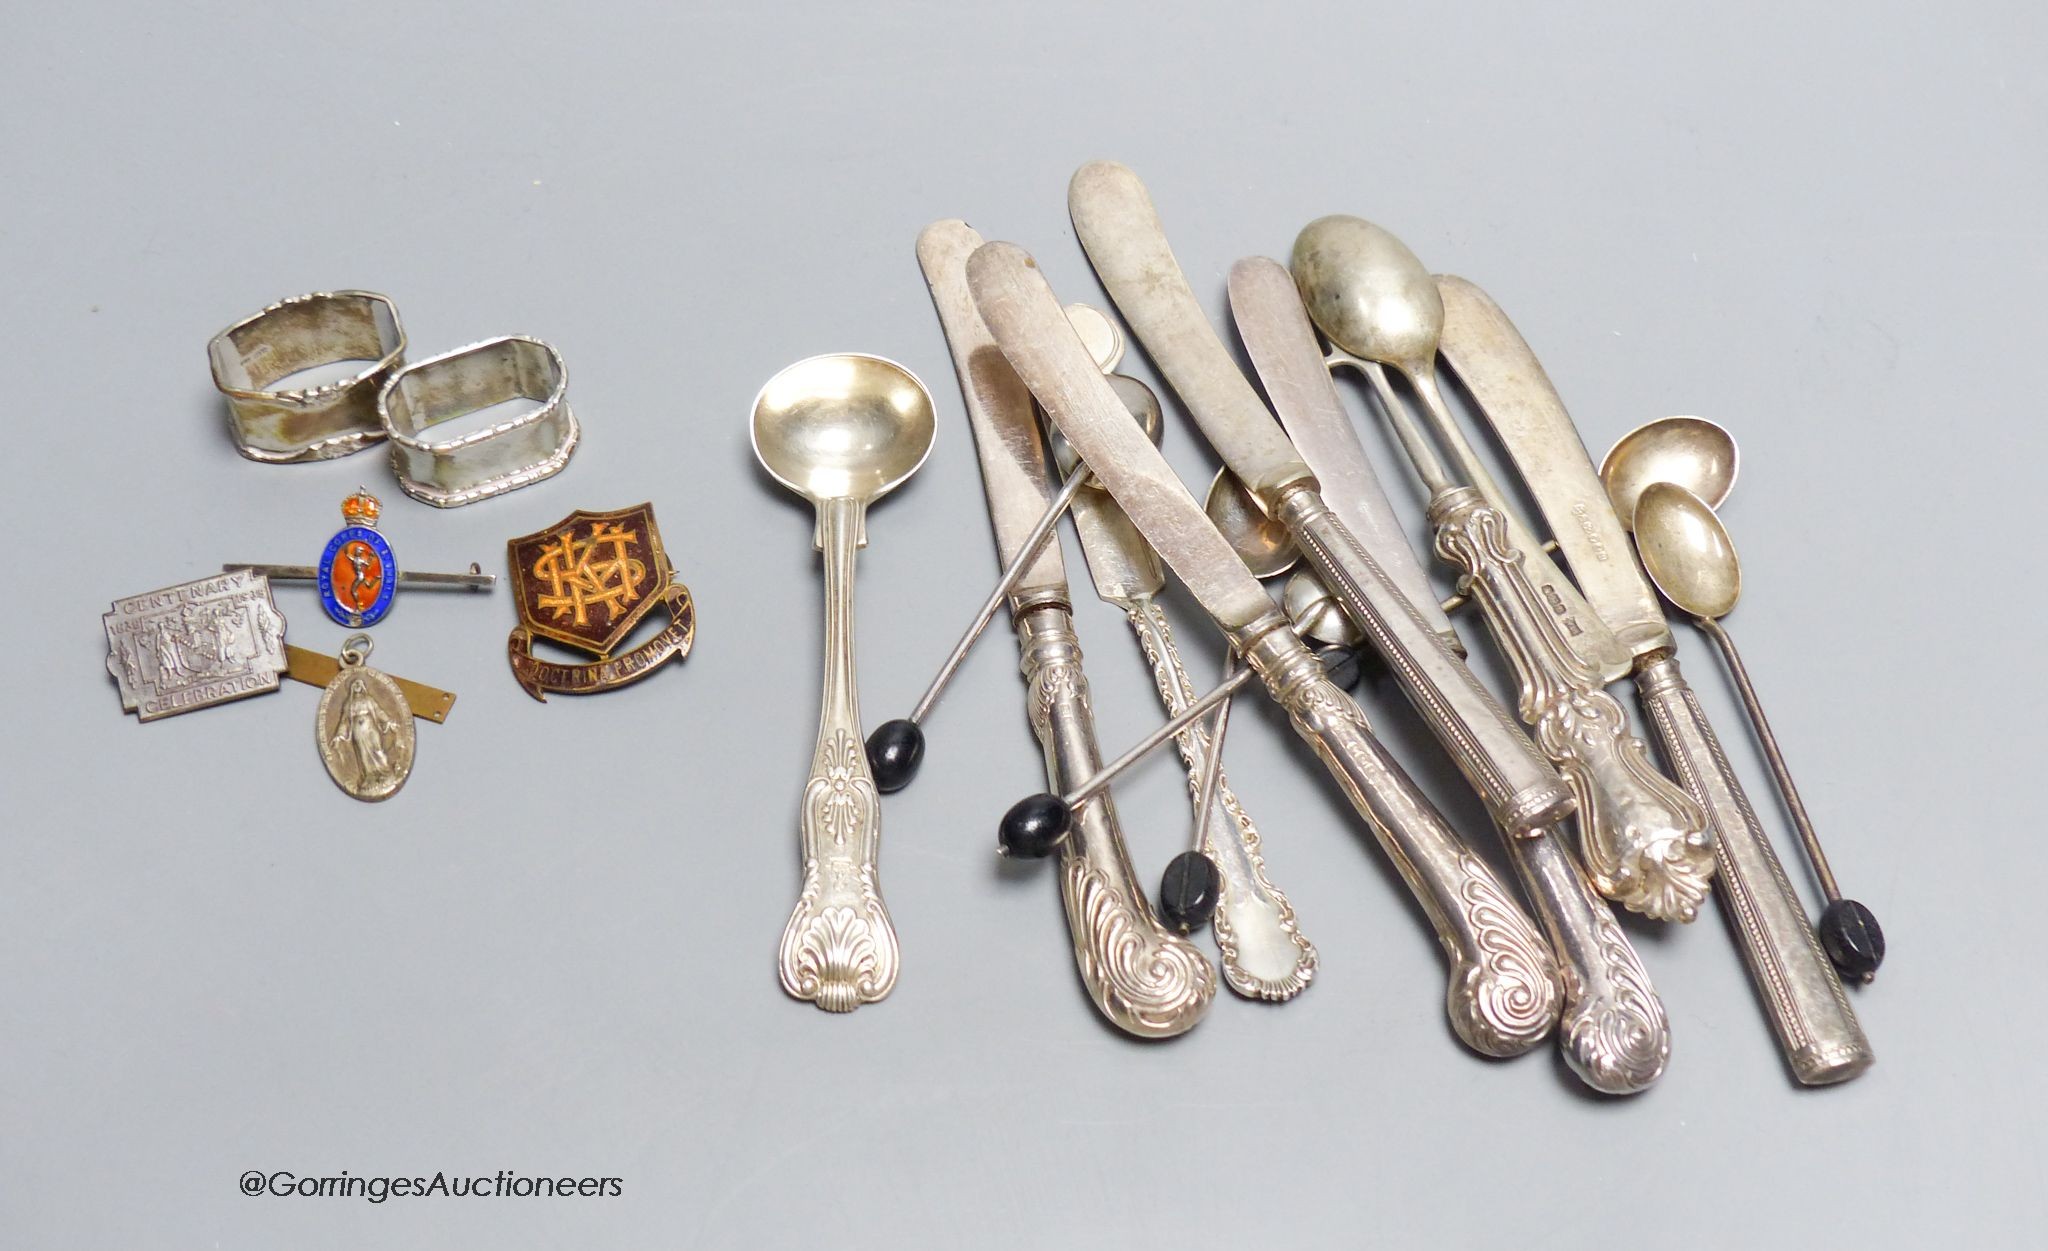 Six silver 'bean' handled coffee spoons, a Victorian silver mustard spoon, a butter knife, a pickle fork and other silver cutlery, a pair of scarf rings and four other items